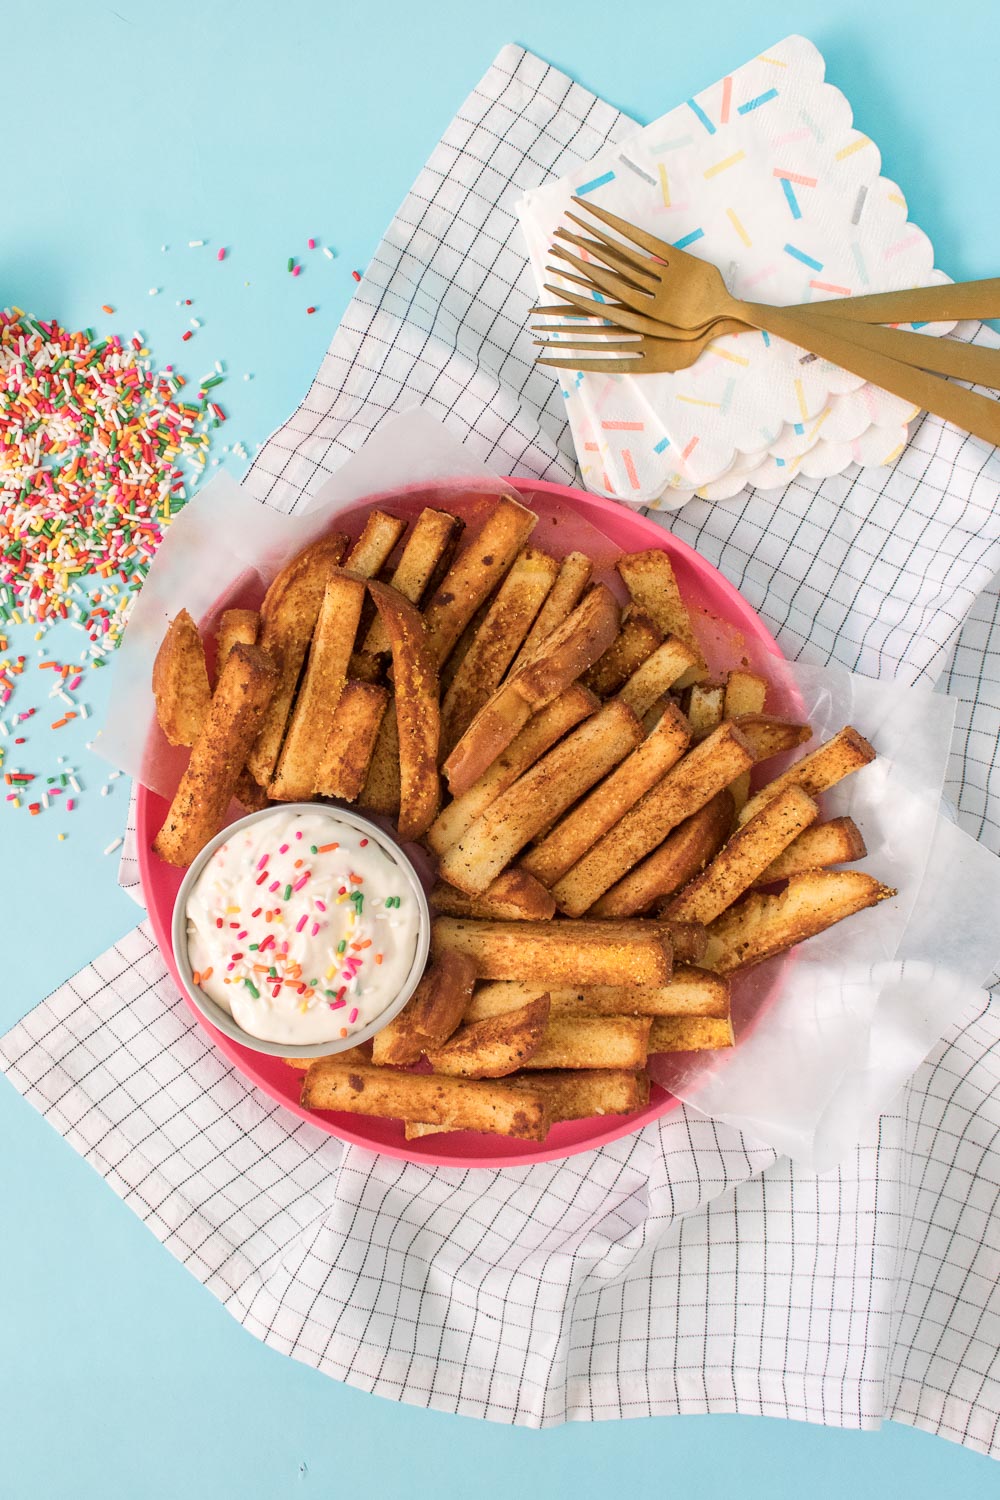 Cake Fries + Frosting Dipping Sauce | Club Crafted